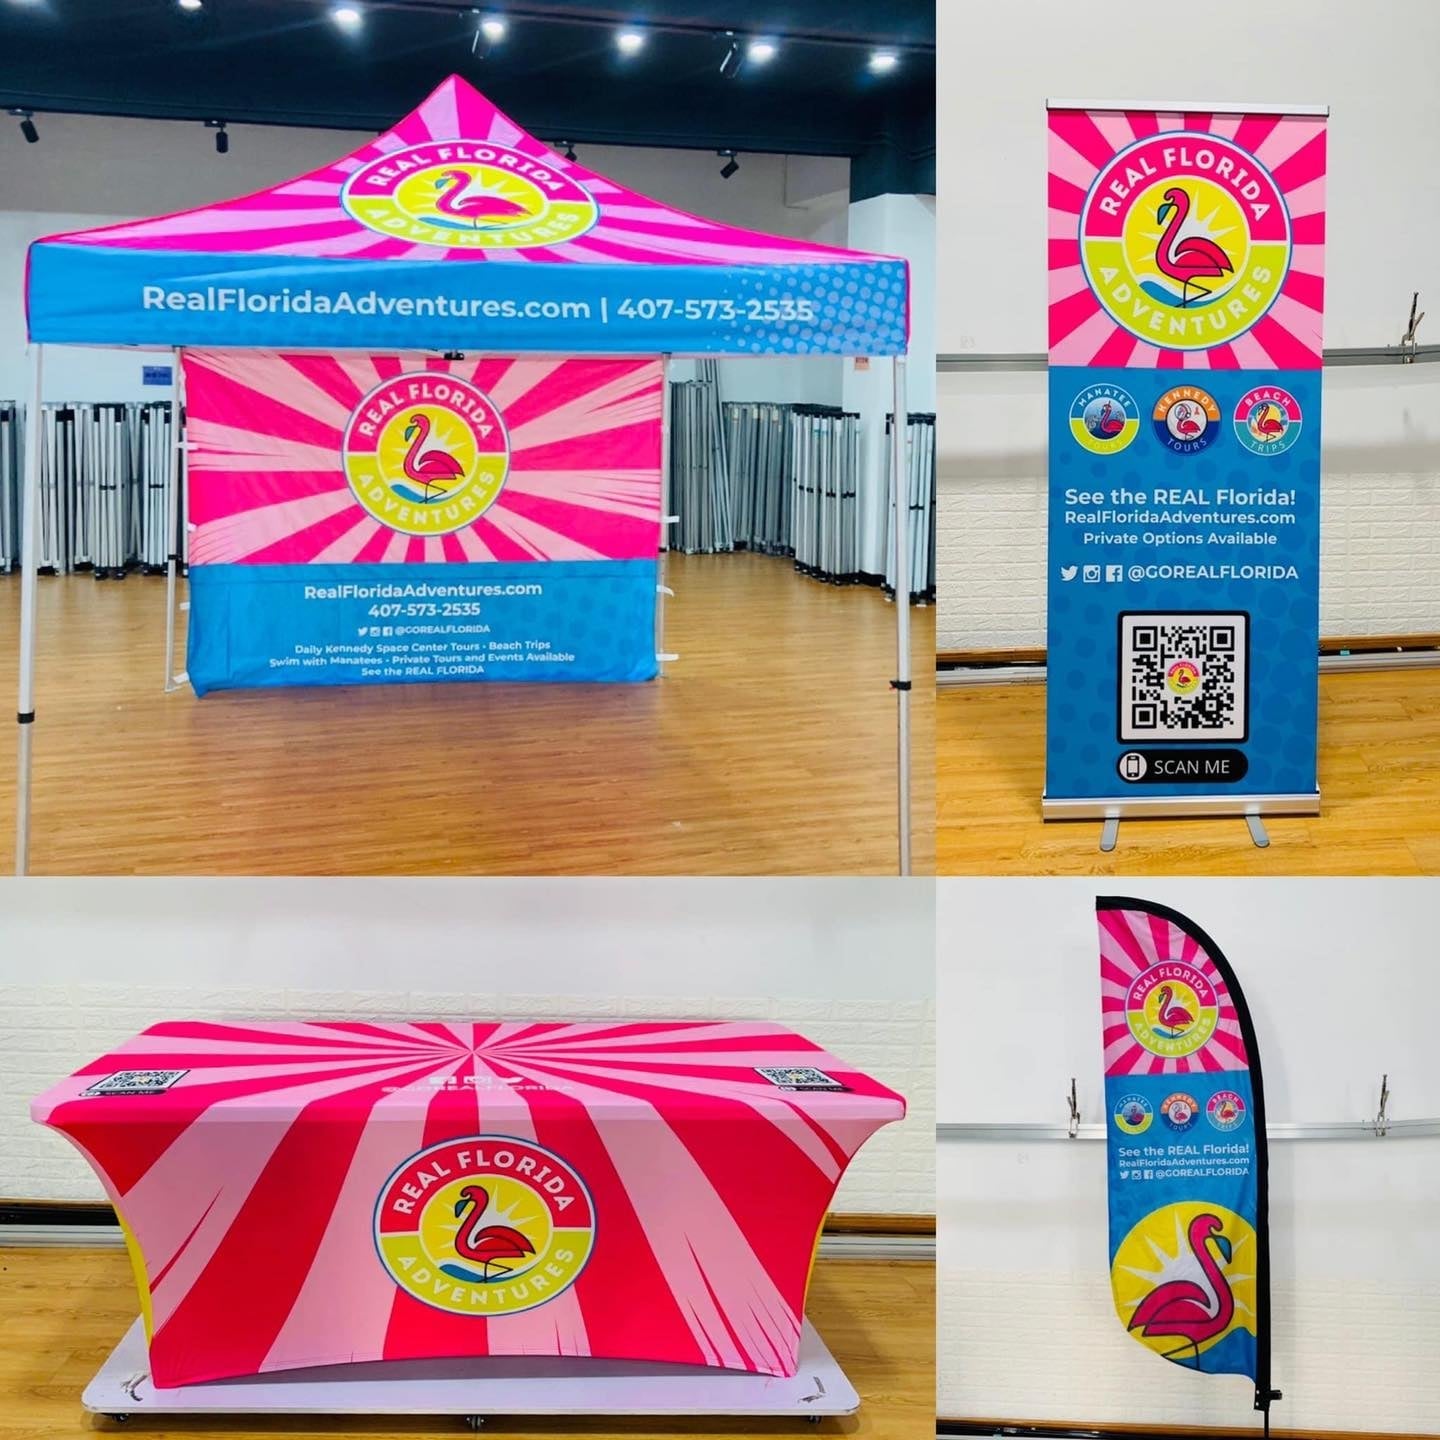 10' x 10' Pop-Up Tent with Single-Sided Back Wall, 6' Table Cover, Roll-up Banner with Stand, 8' Flag with Base